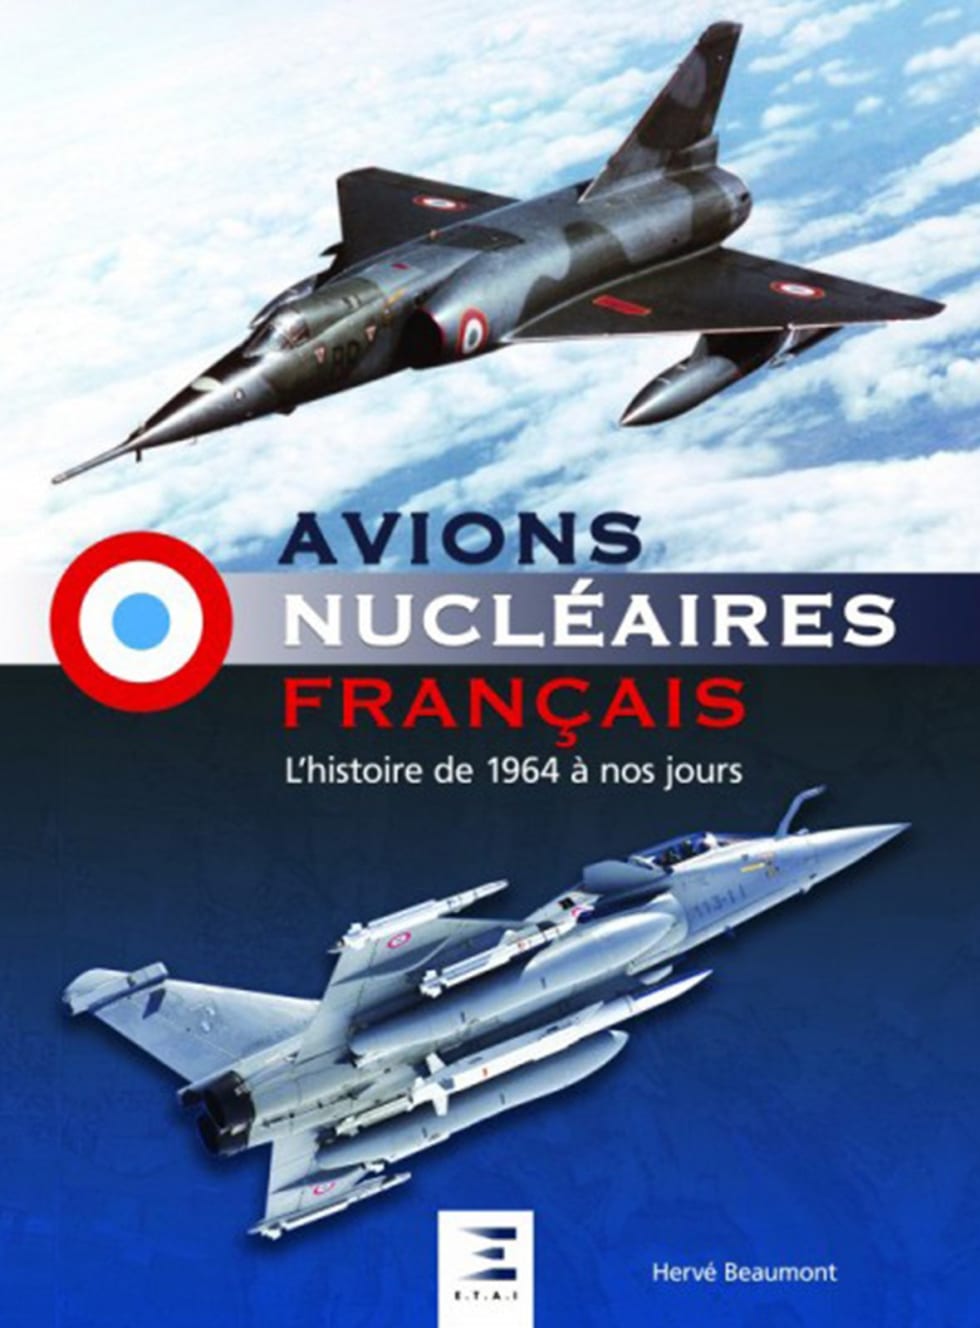 A history of French nuclear aircraft, 1964 to present